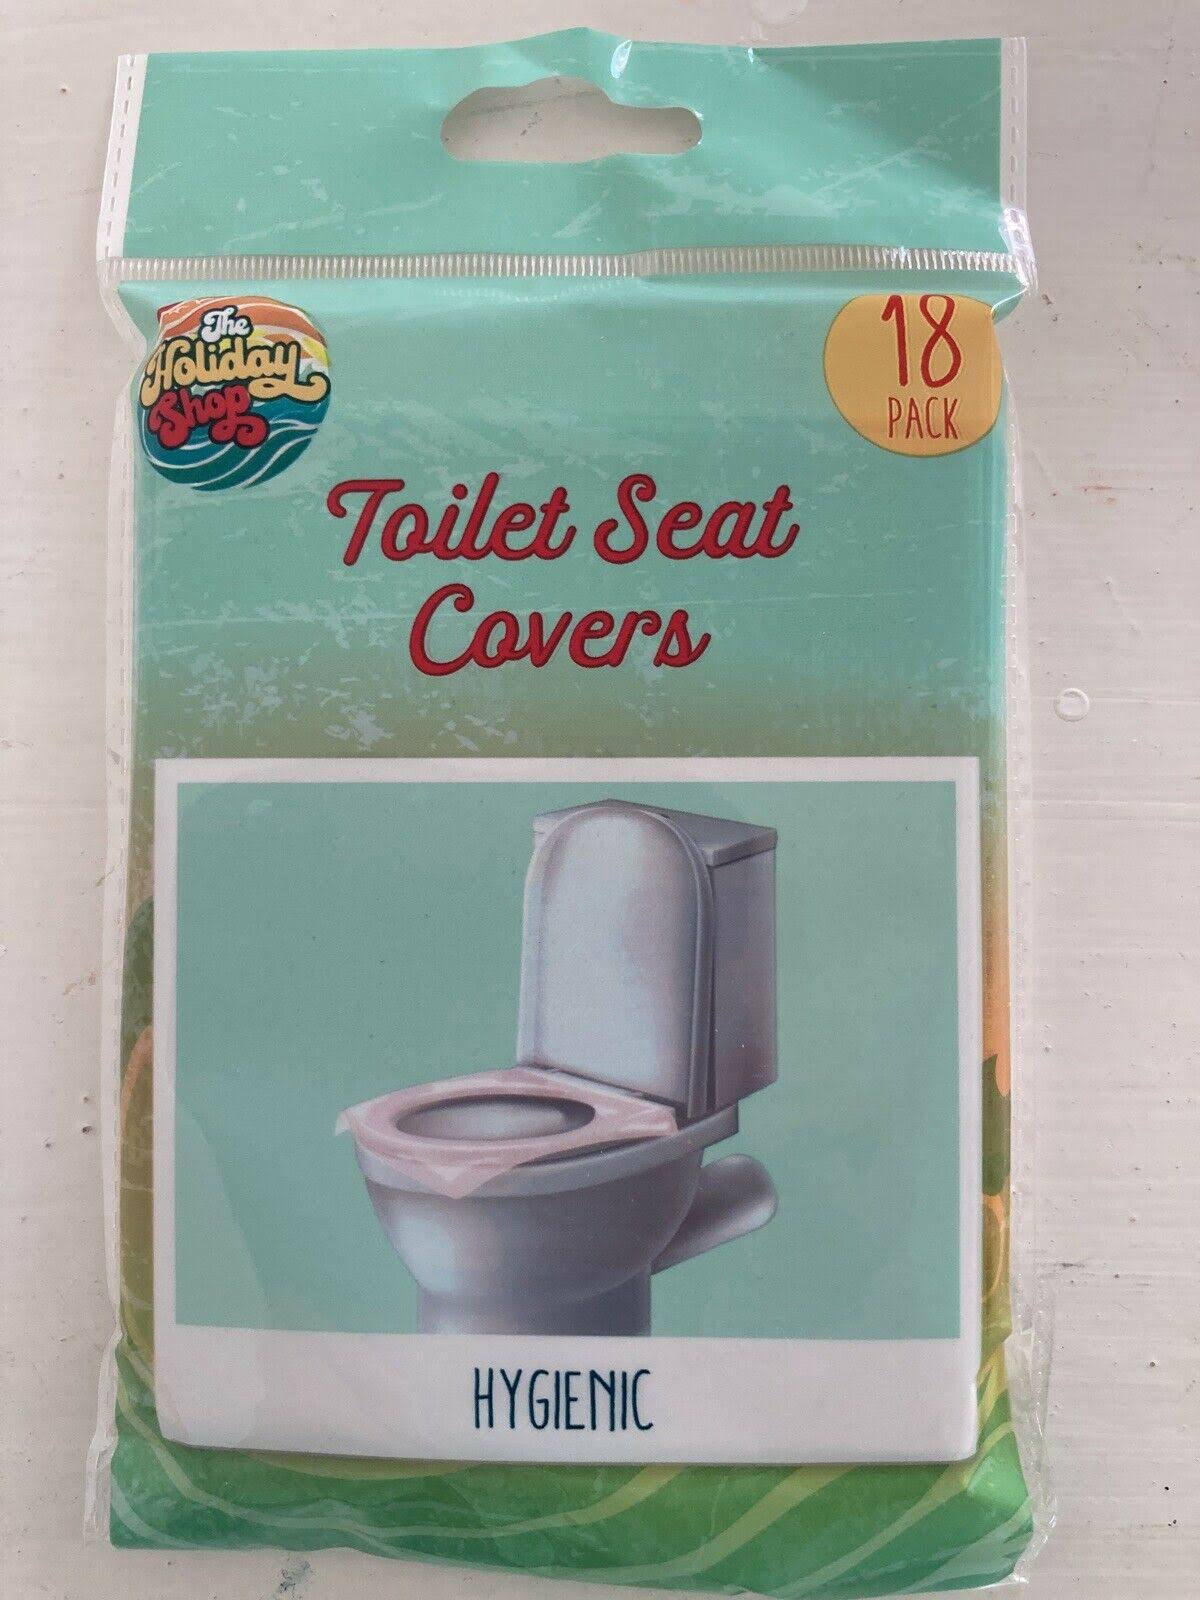 PLDZ Toilet Seat Covers 18 Pack, Hygenic and Travel Friendly